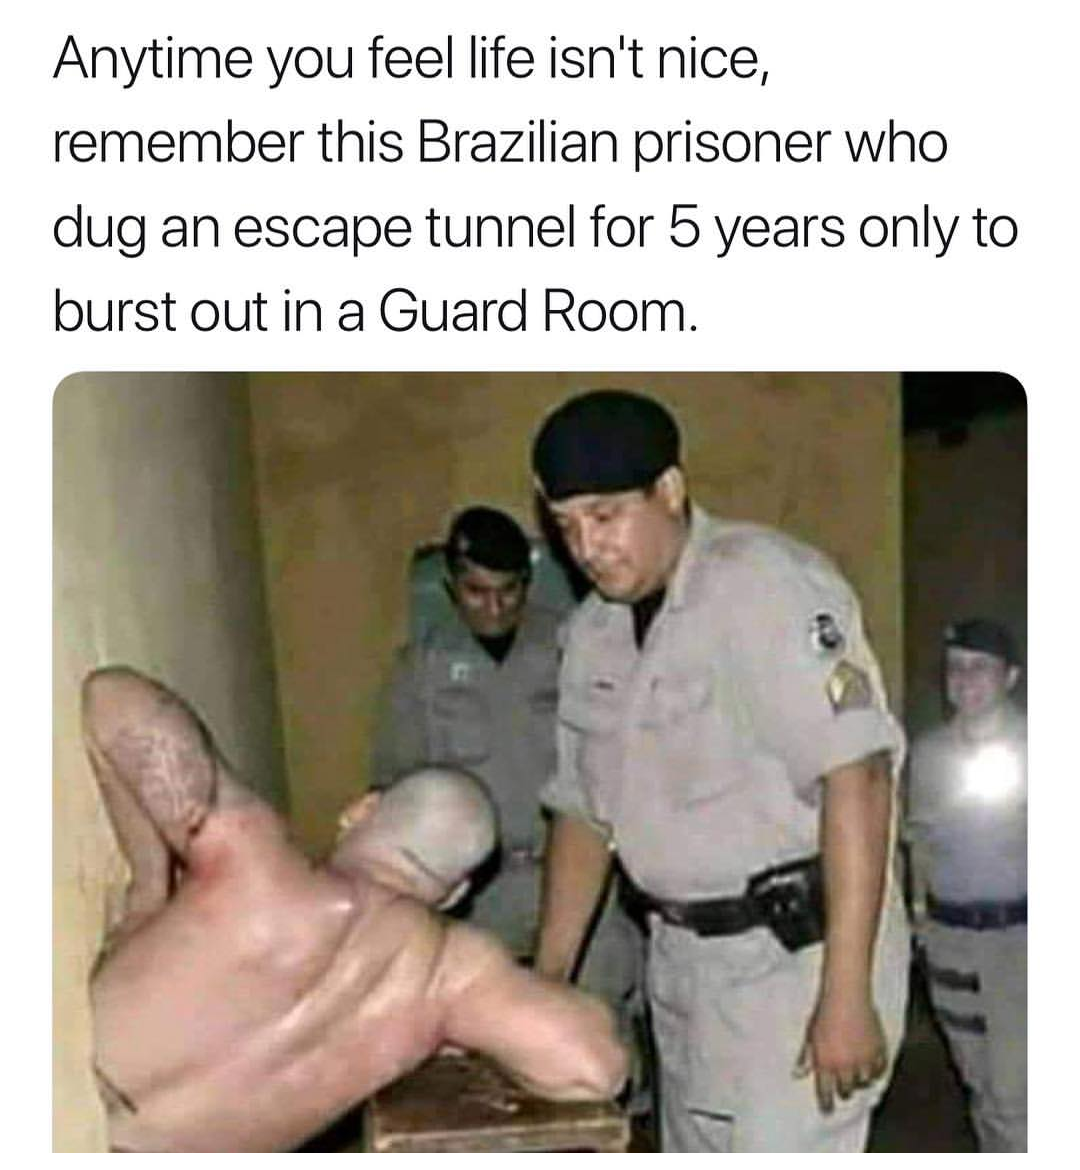 brazilian prisoner who dug a tunnel for 5 years - Anytime you feel life isn't nice, remember this Brazilian prisoner who dug an escape tunnel for 5 years only to burst out in a Guard Room.